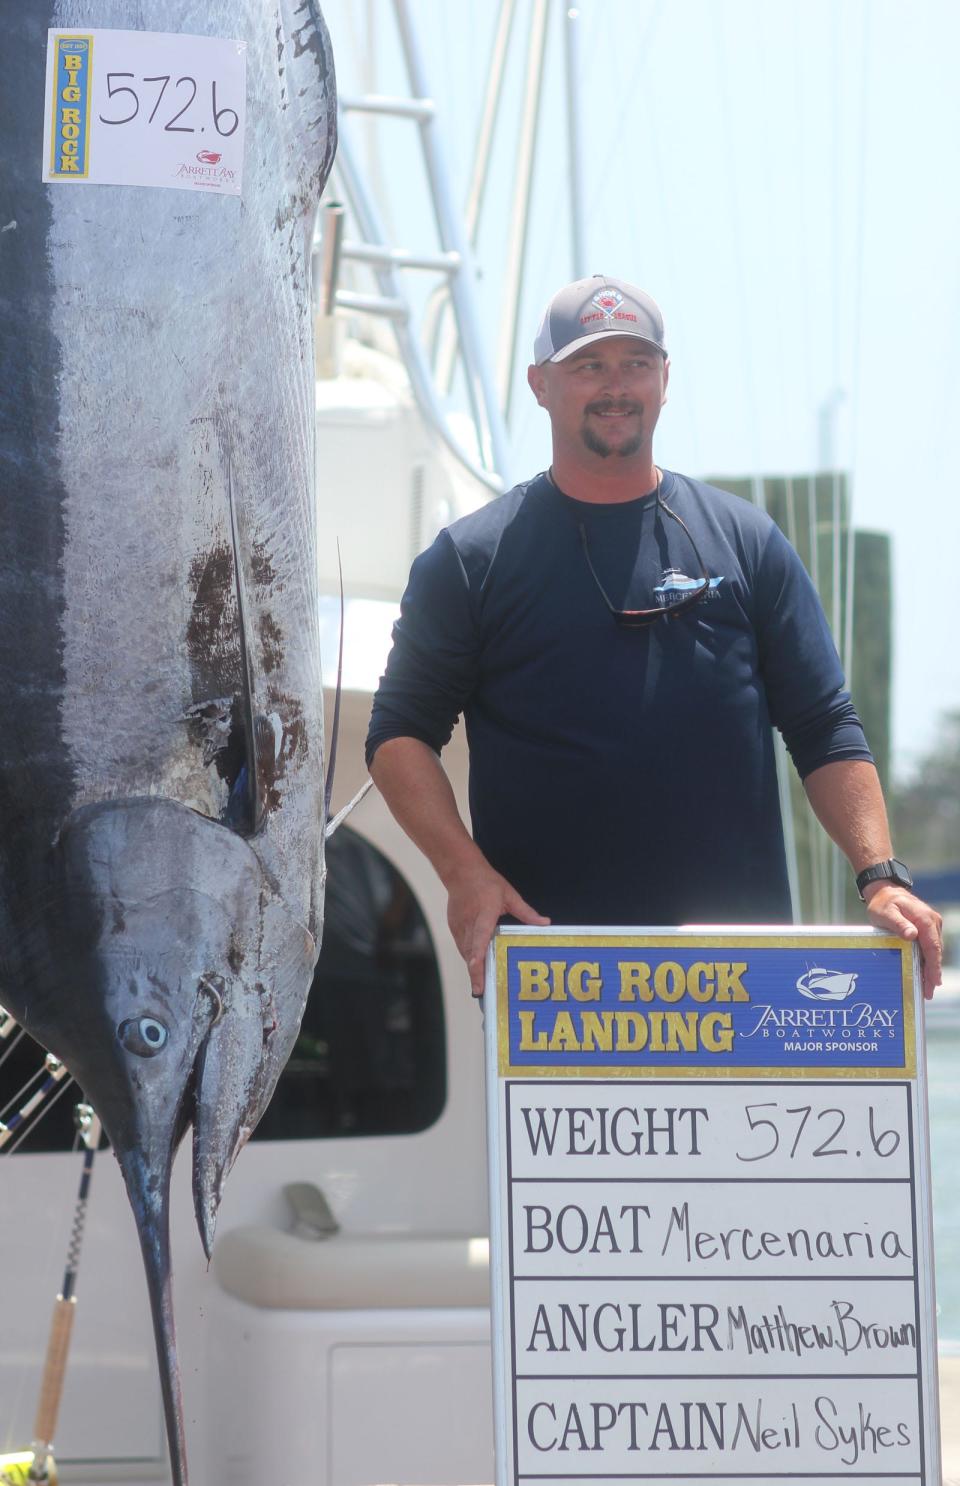 Mercenaria angler Matthew Brown stands next to the 572.6-pound catch that earned the crew the Level V Fabulous Fisherman's prize of $777,750 from the Big Rock's $5,856,750 purse.